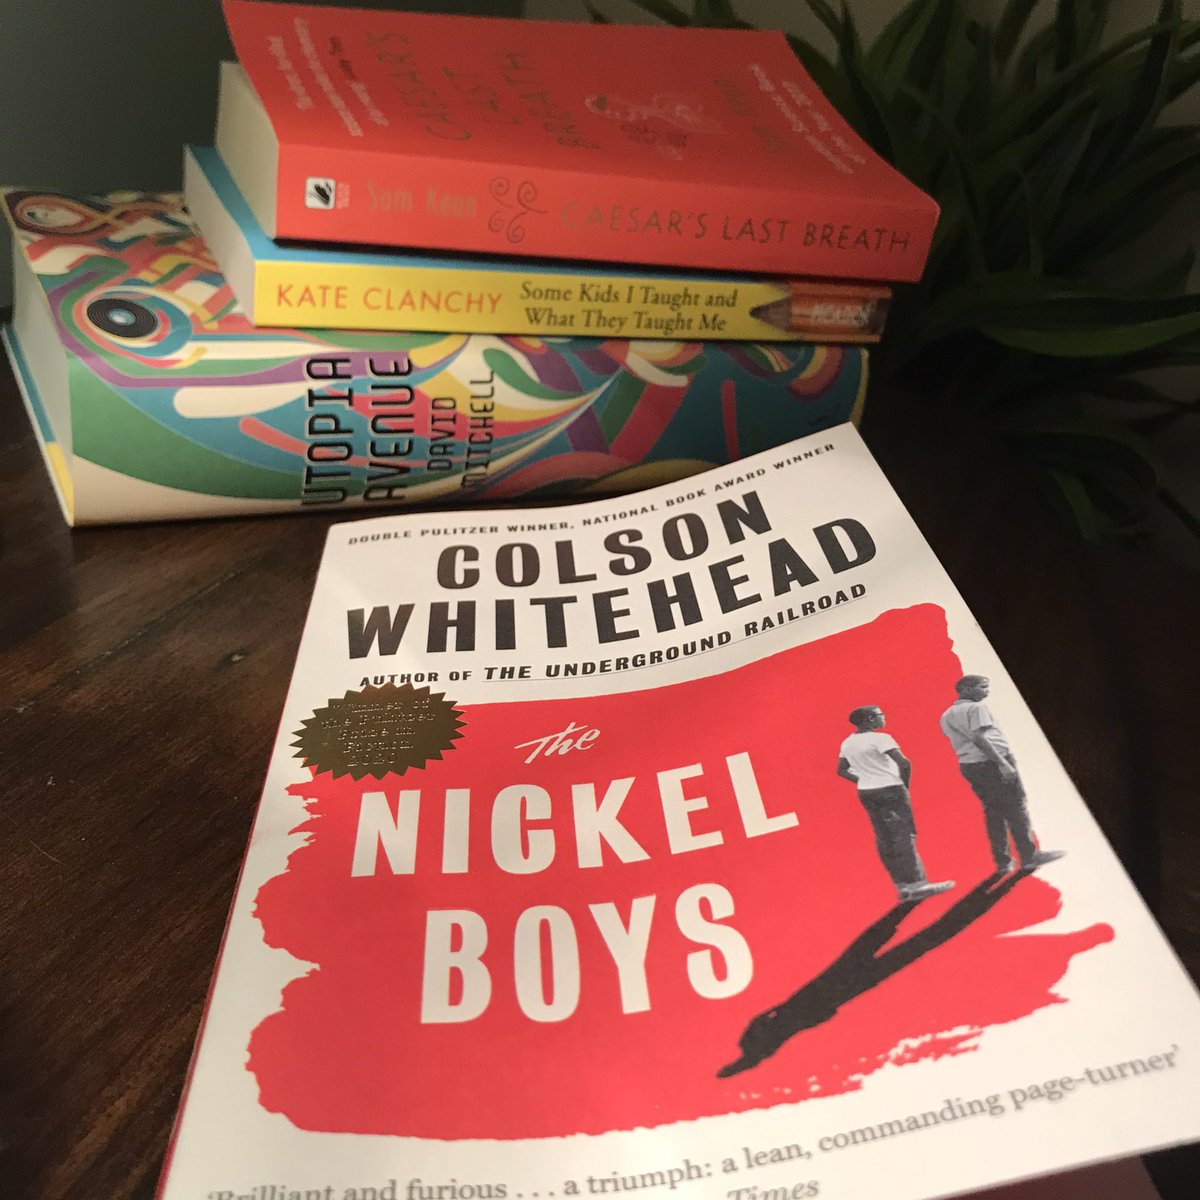 Book 23: The Nickel Boys - Colson Whitehead. Just superb, an essential read. Colson’s writing is exquisite. Read in one sitting.